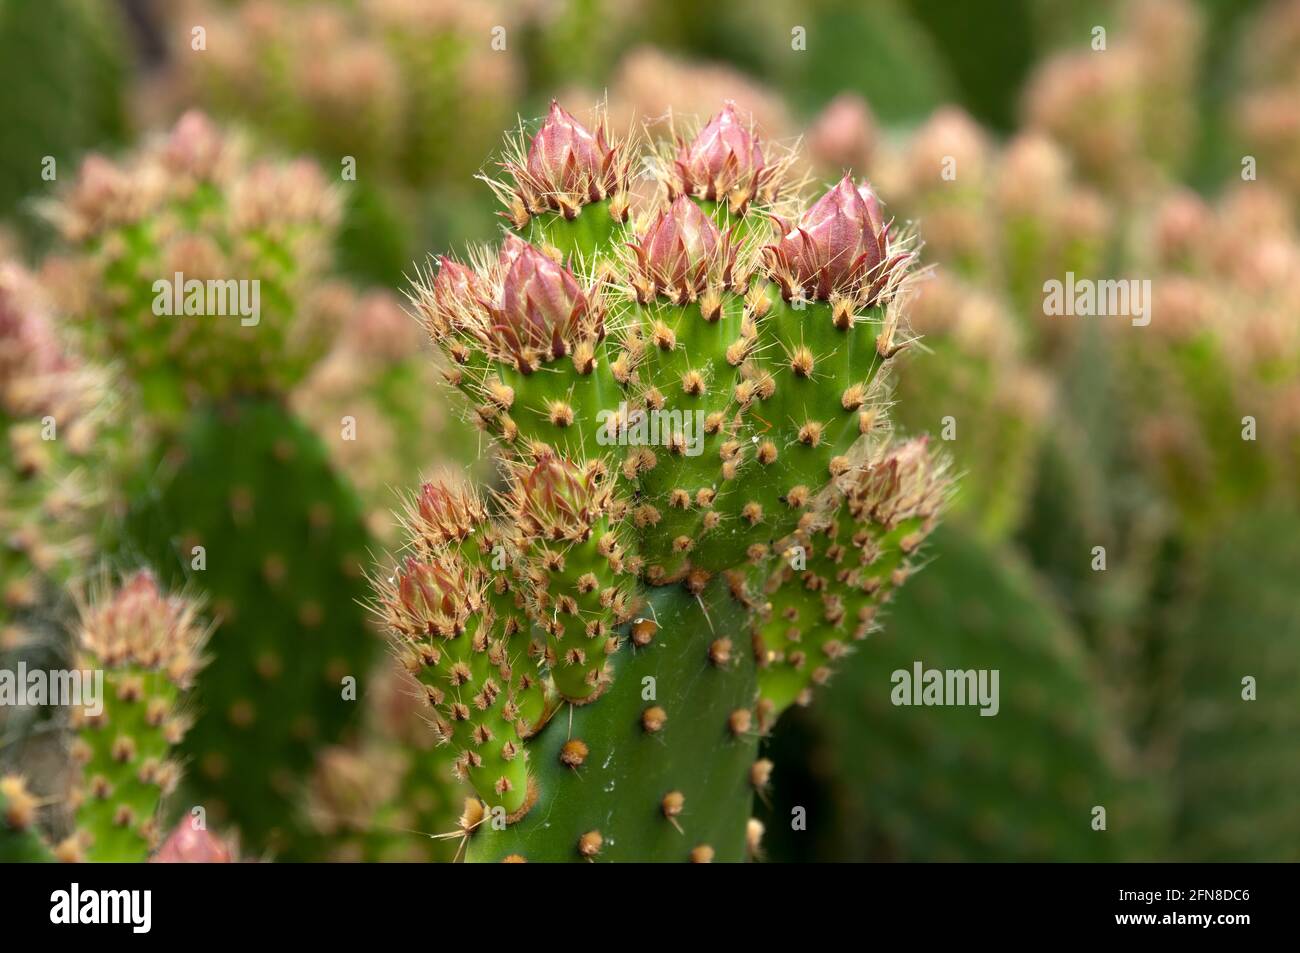 Sydney Australia, prickly pear leaves with flower buds Stock Photo